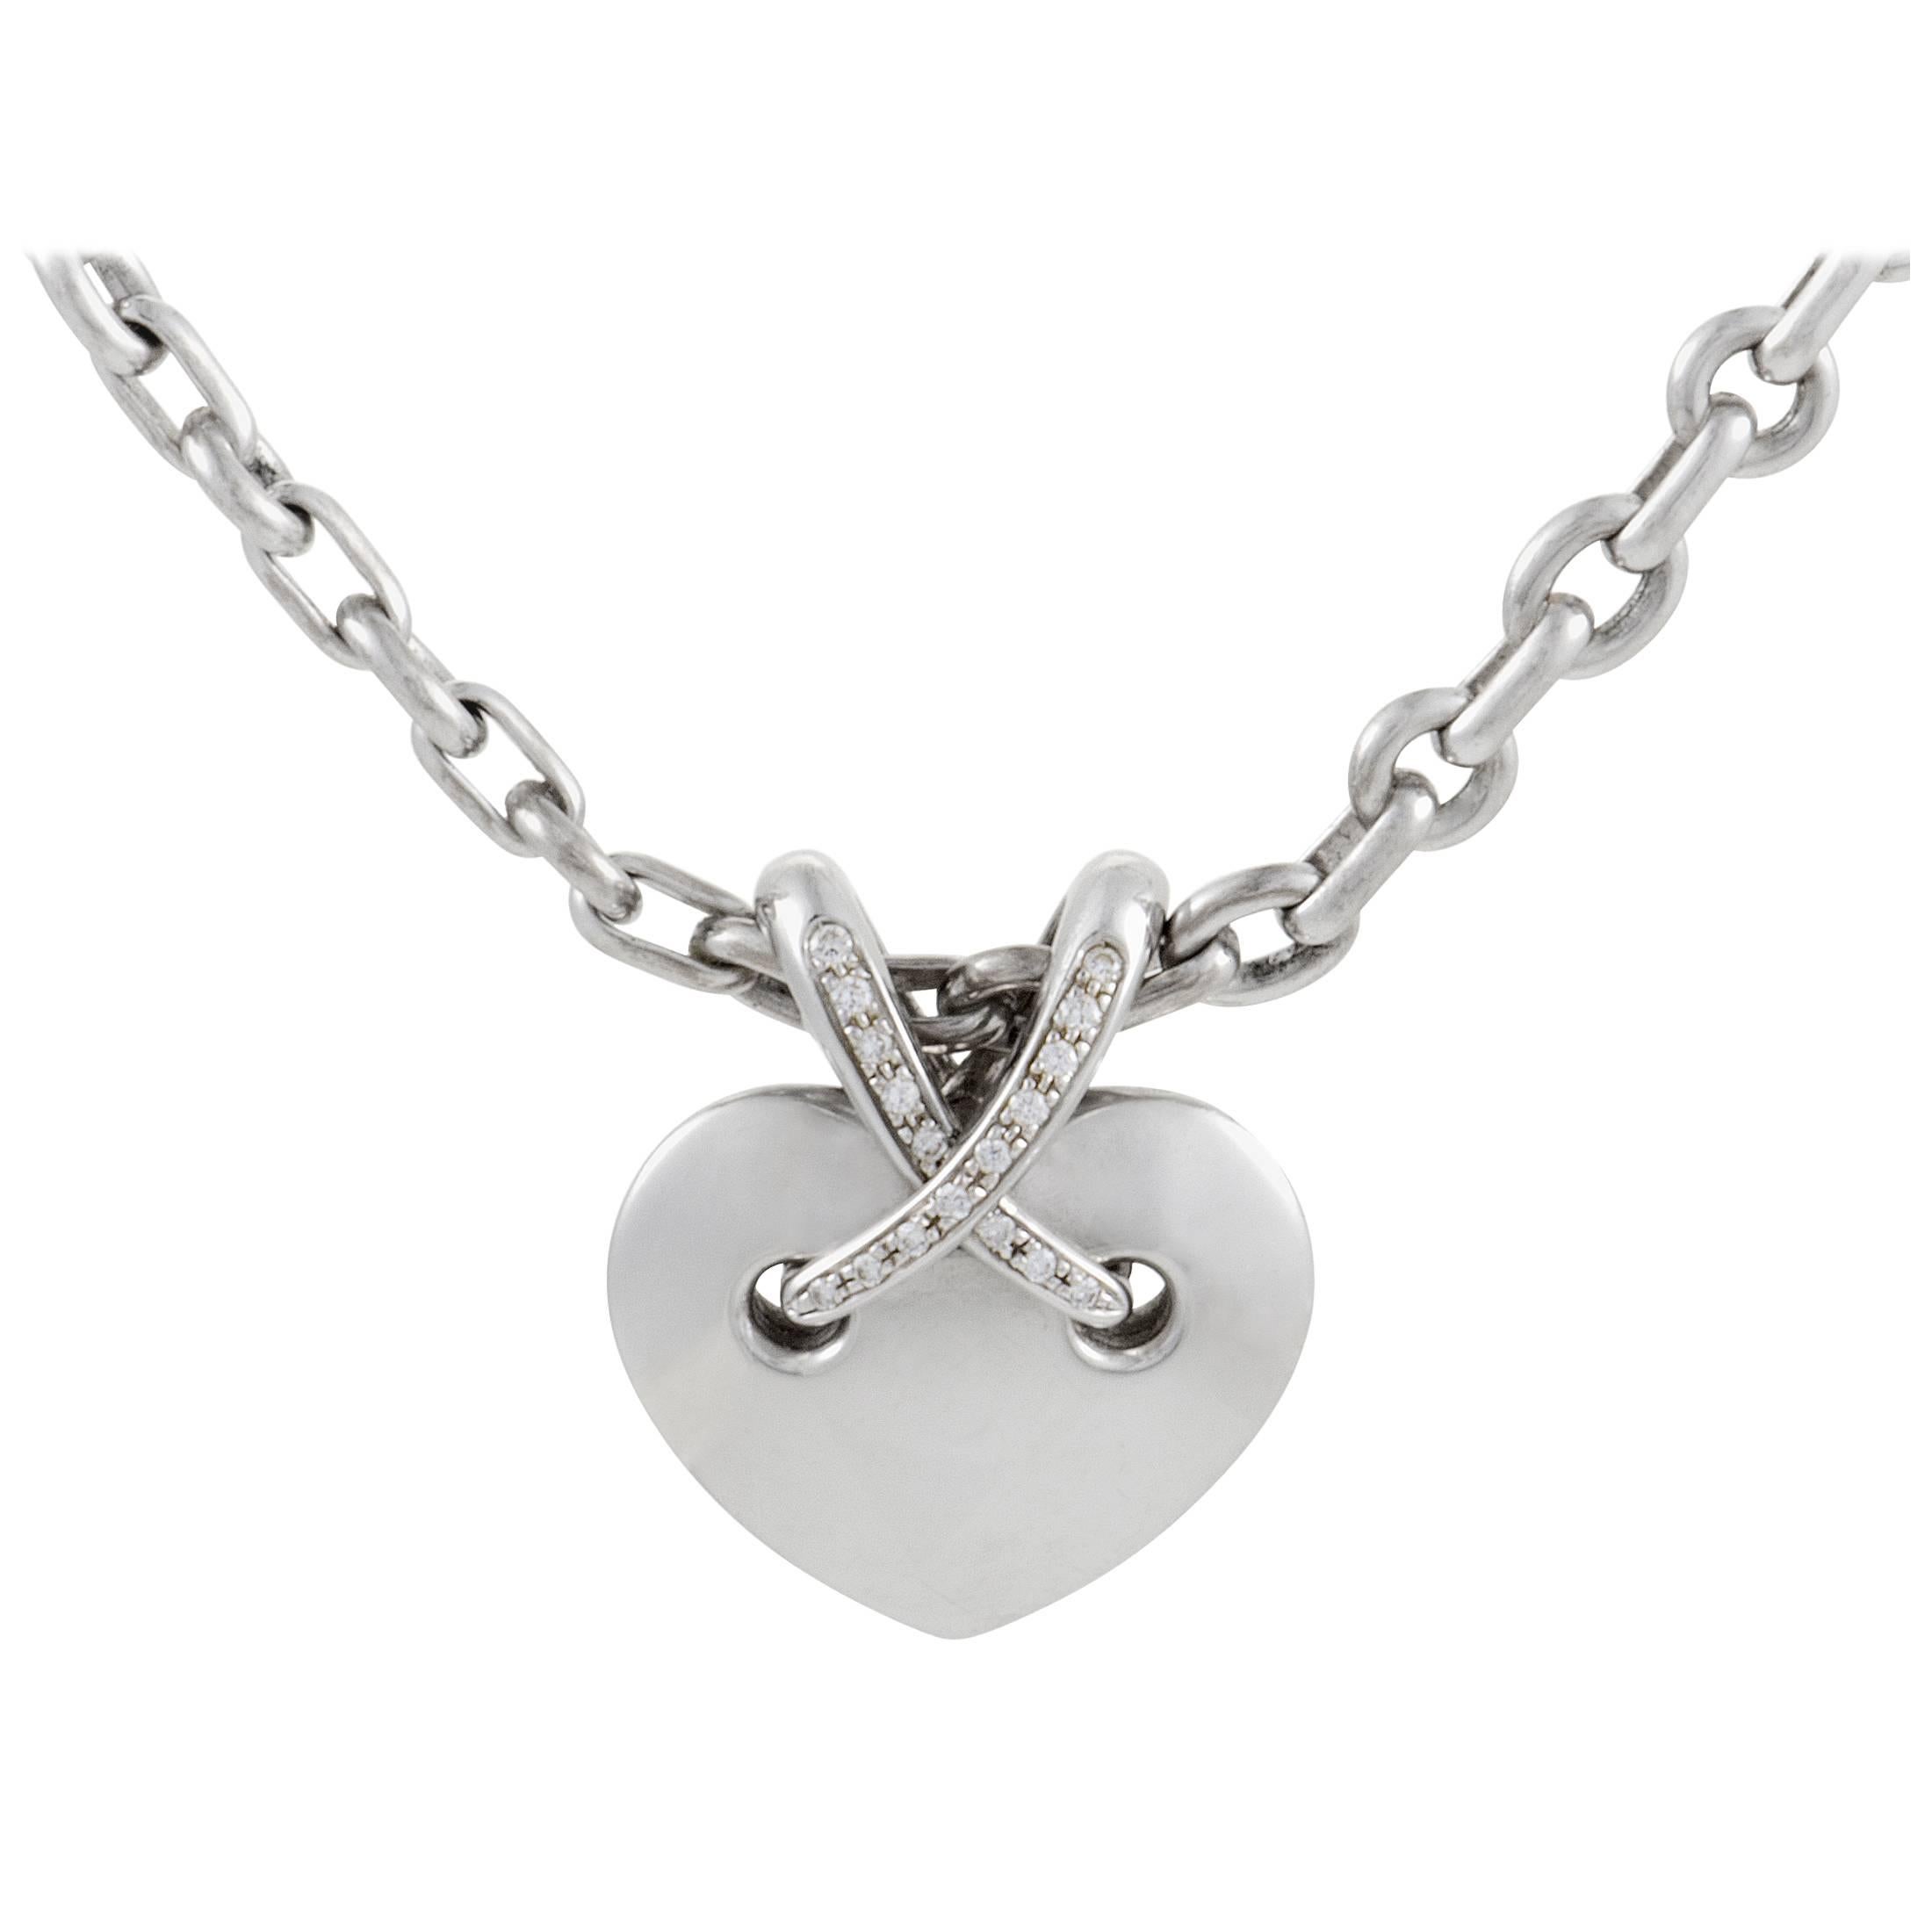 Chaumet Liens Large Diamond and White Gold Heart Pendant Necklace